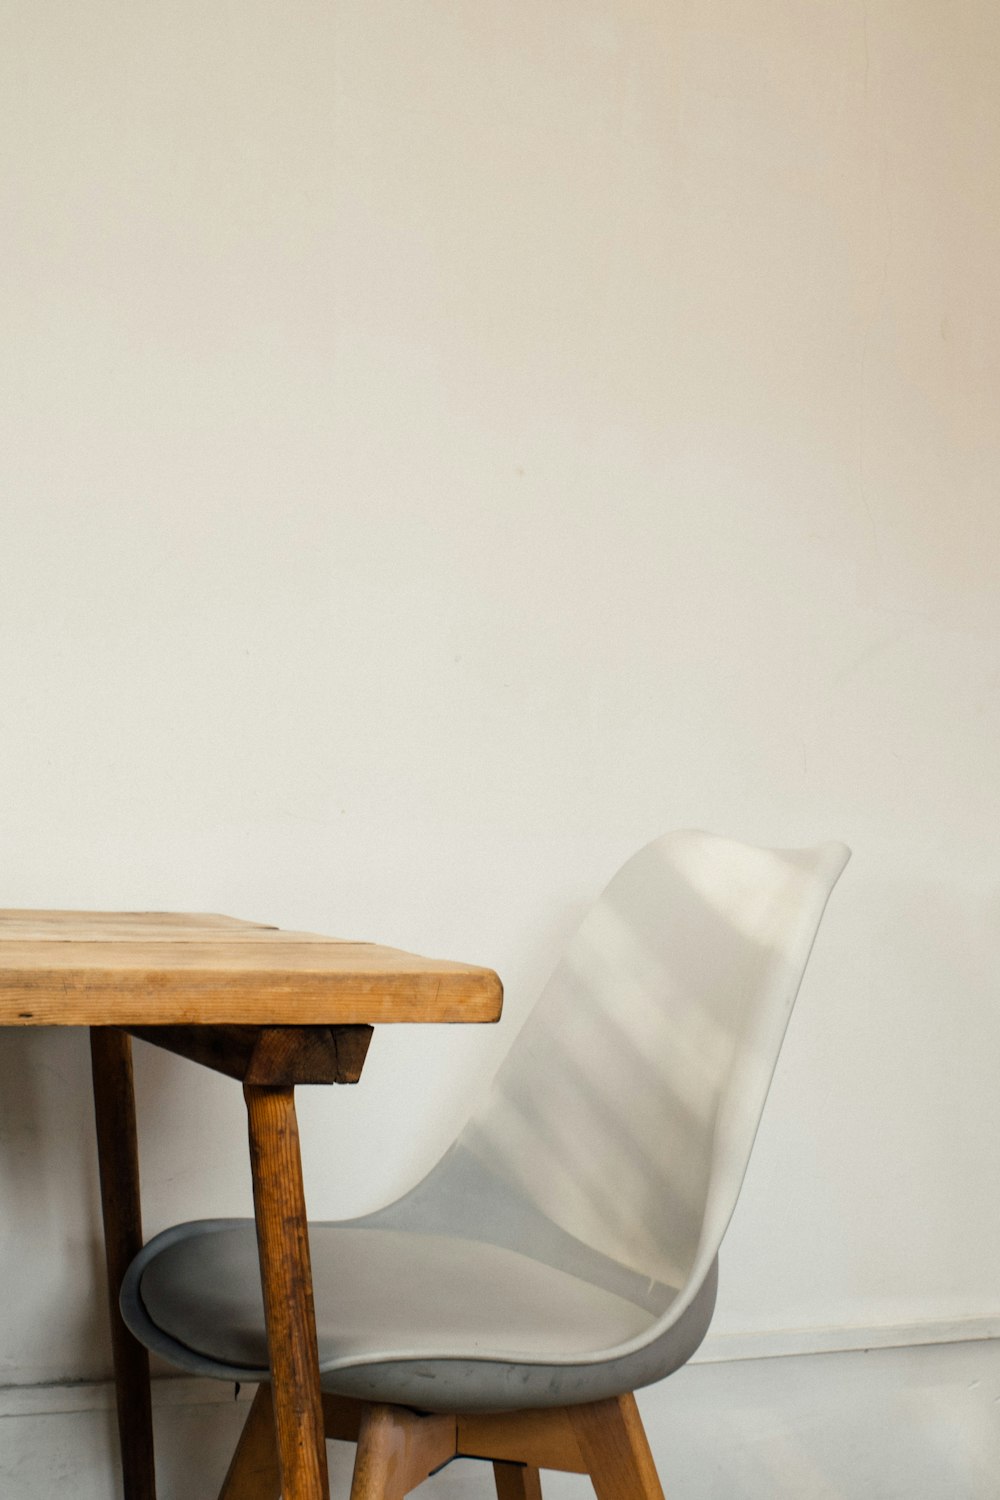 white plastic chair beside brown wooden table